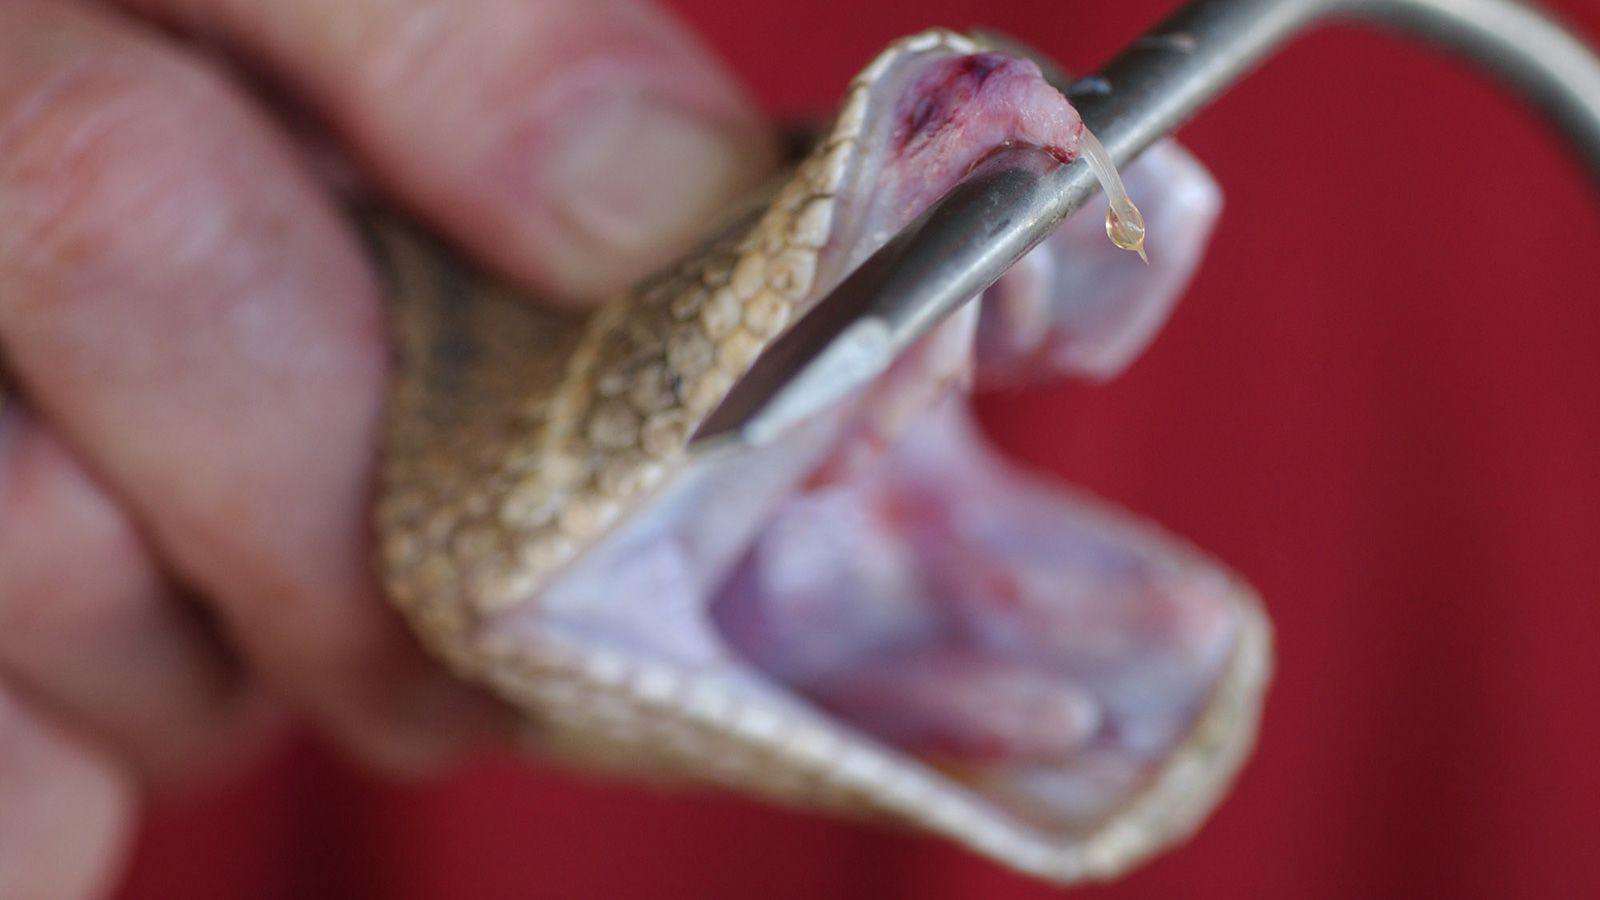 What to Do With a Rattlesnake Bite?